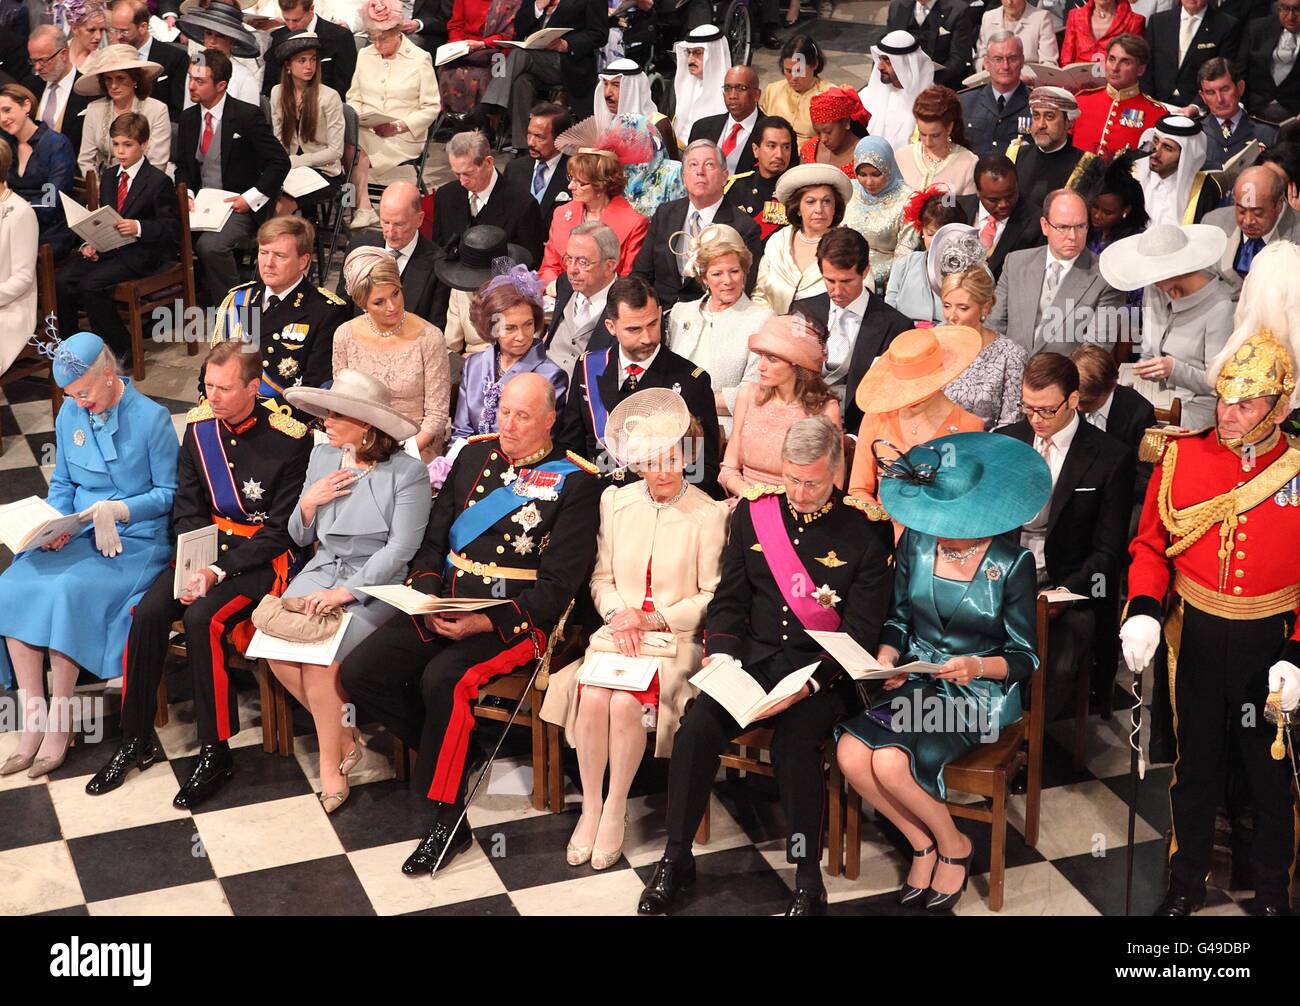 Foreign Royals attend the wedding of Prince William and Kate Middleton at Westminster Abbey, London. Stock Photo